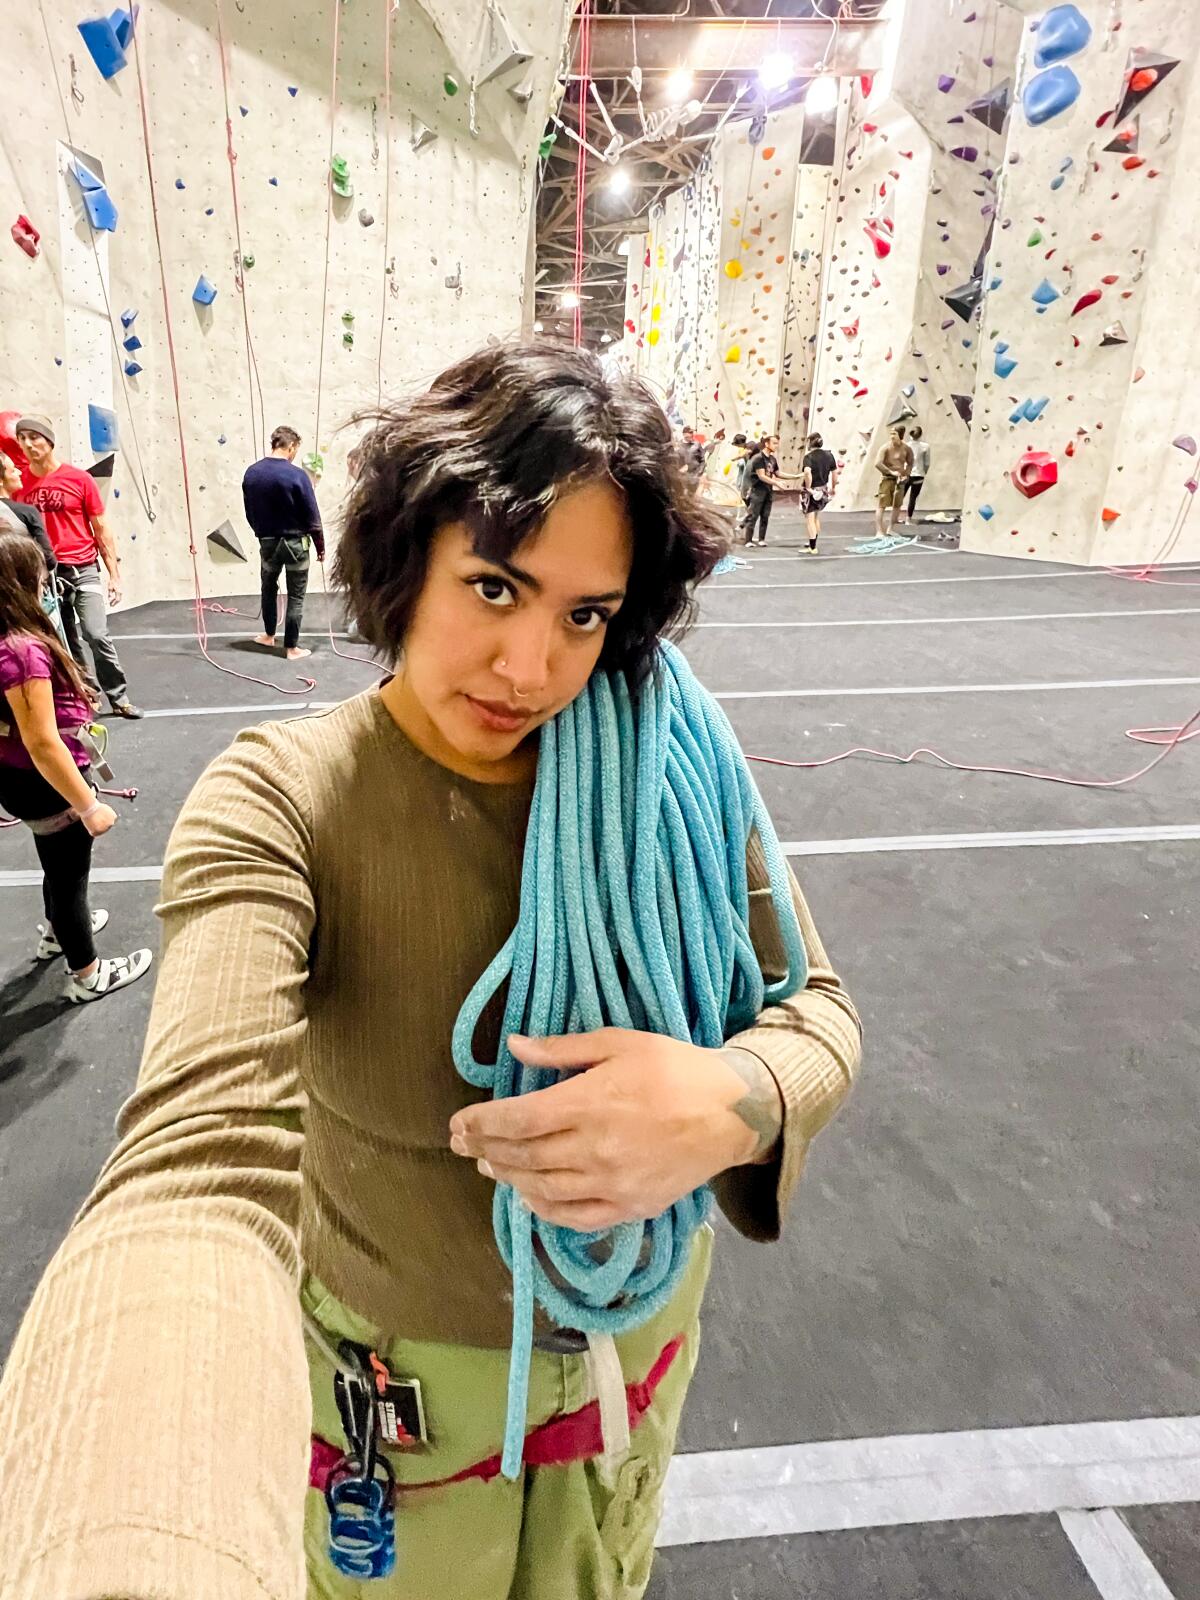 A selfie of Yanira Fuentes at Stronghold Climbing Gym with climbing walls behind her and rope over her shoulder